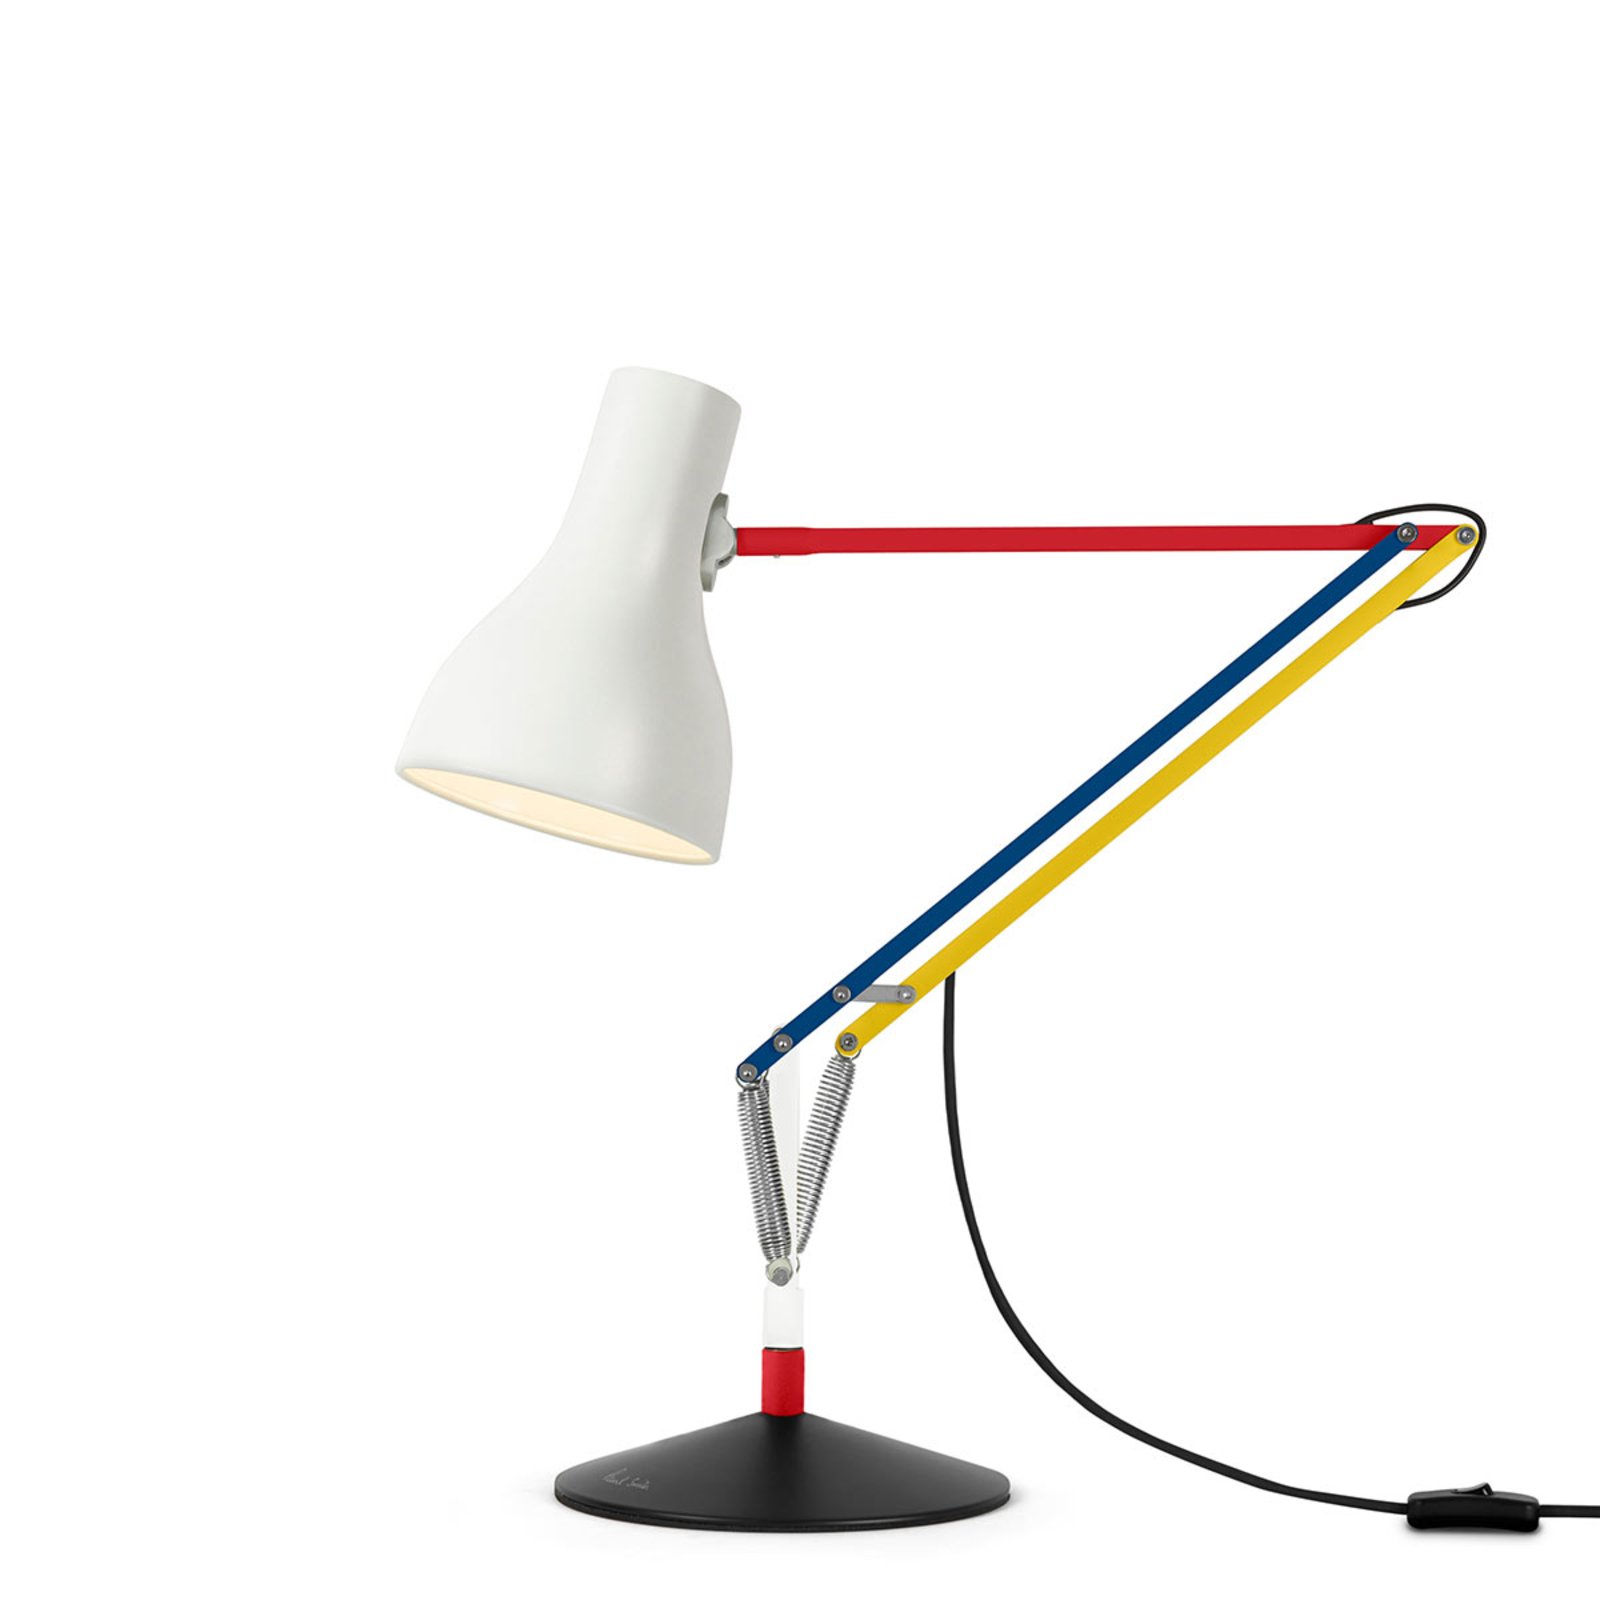 Anglepoise Type 75 Tischlampe Paul Smith Edition 3